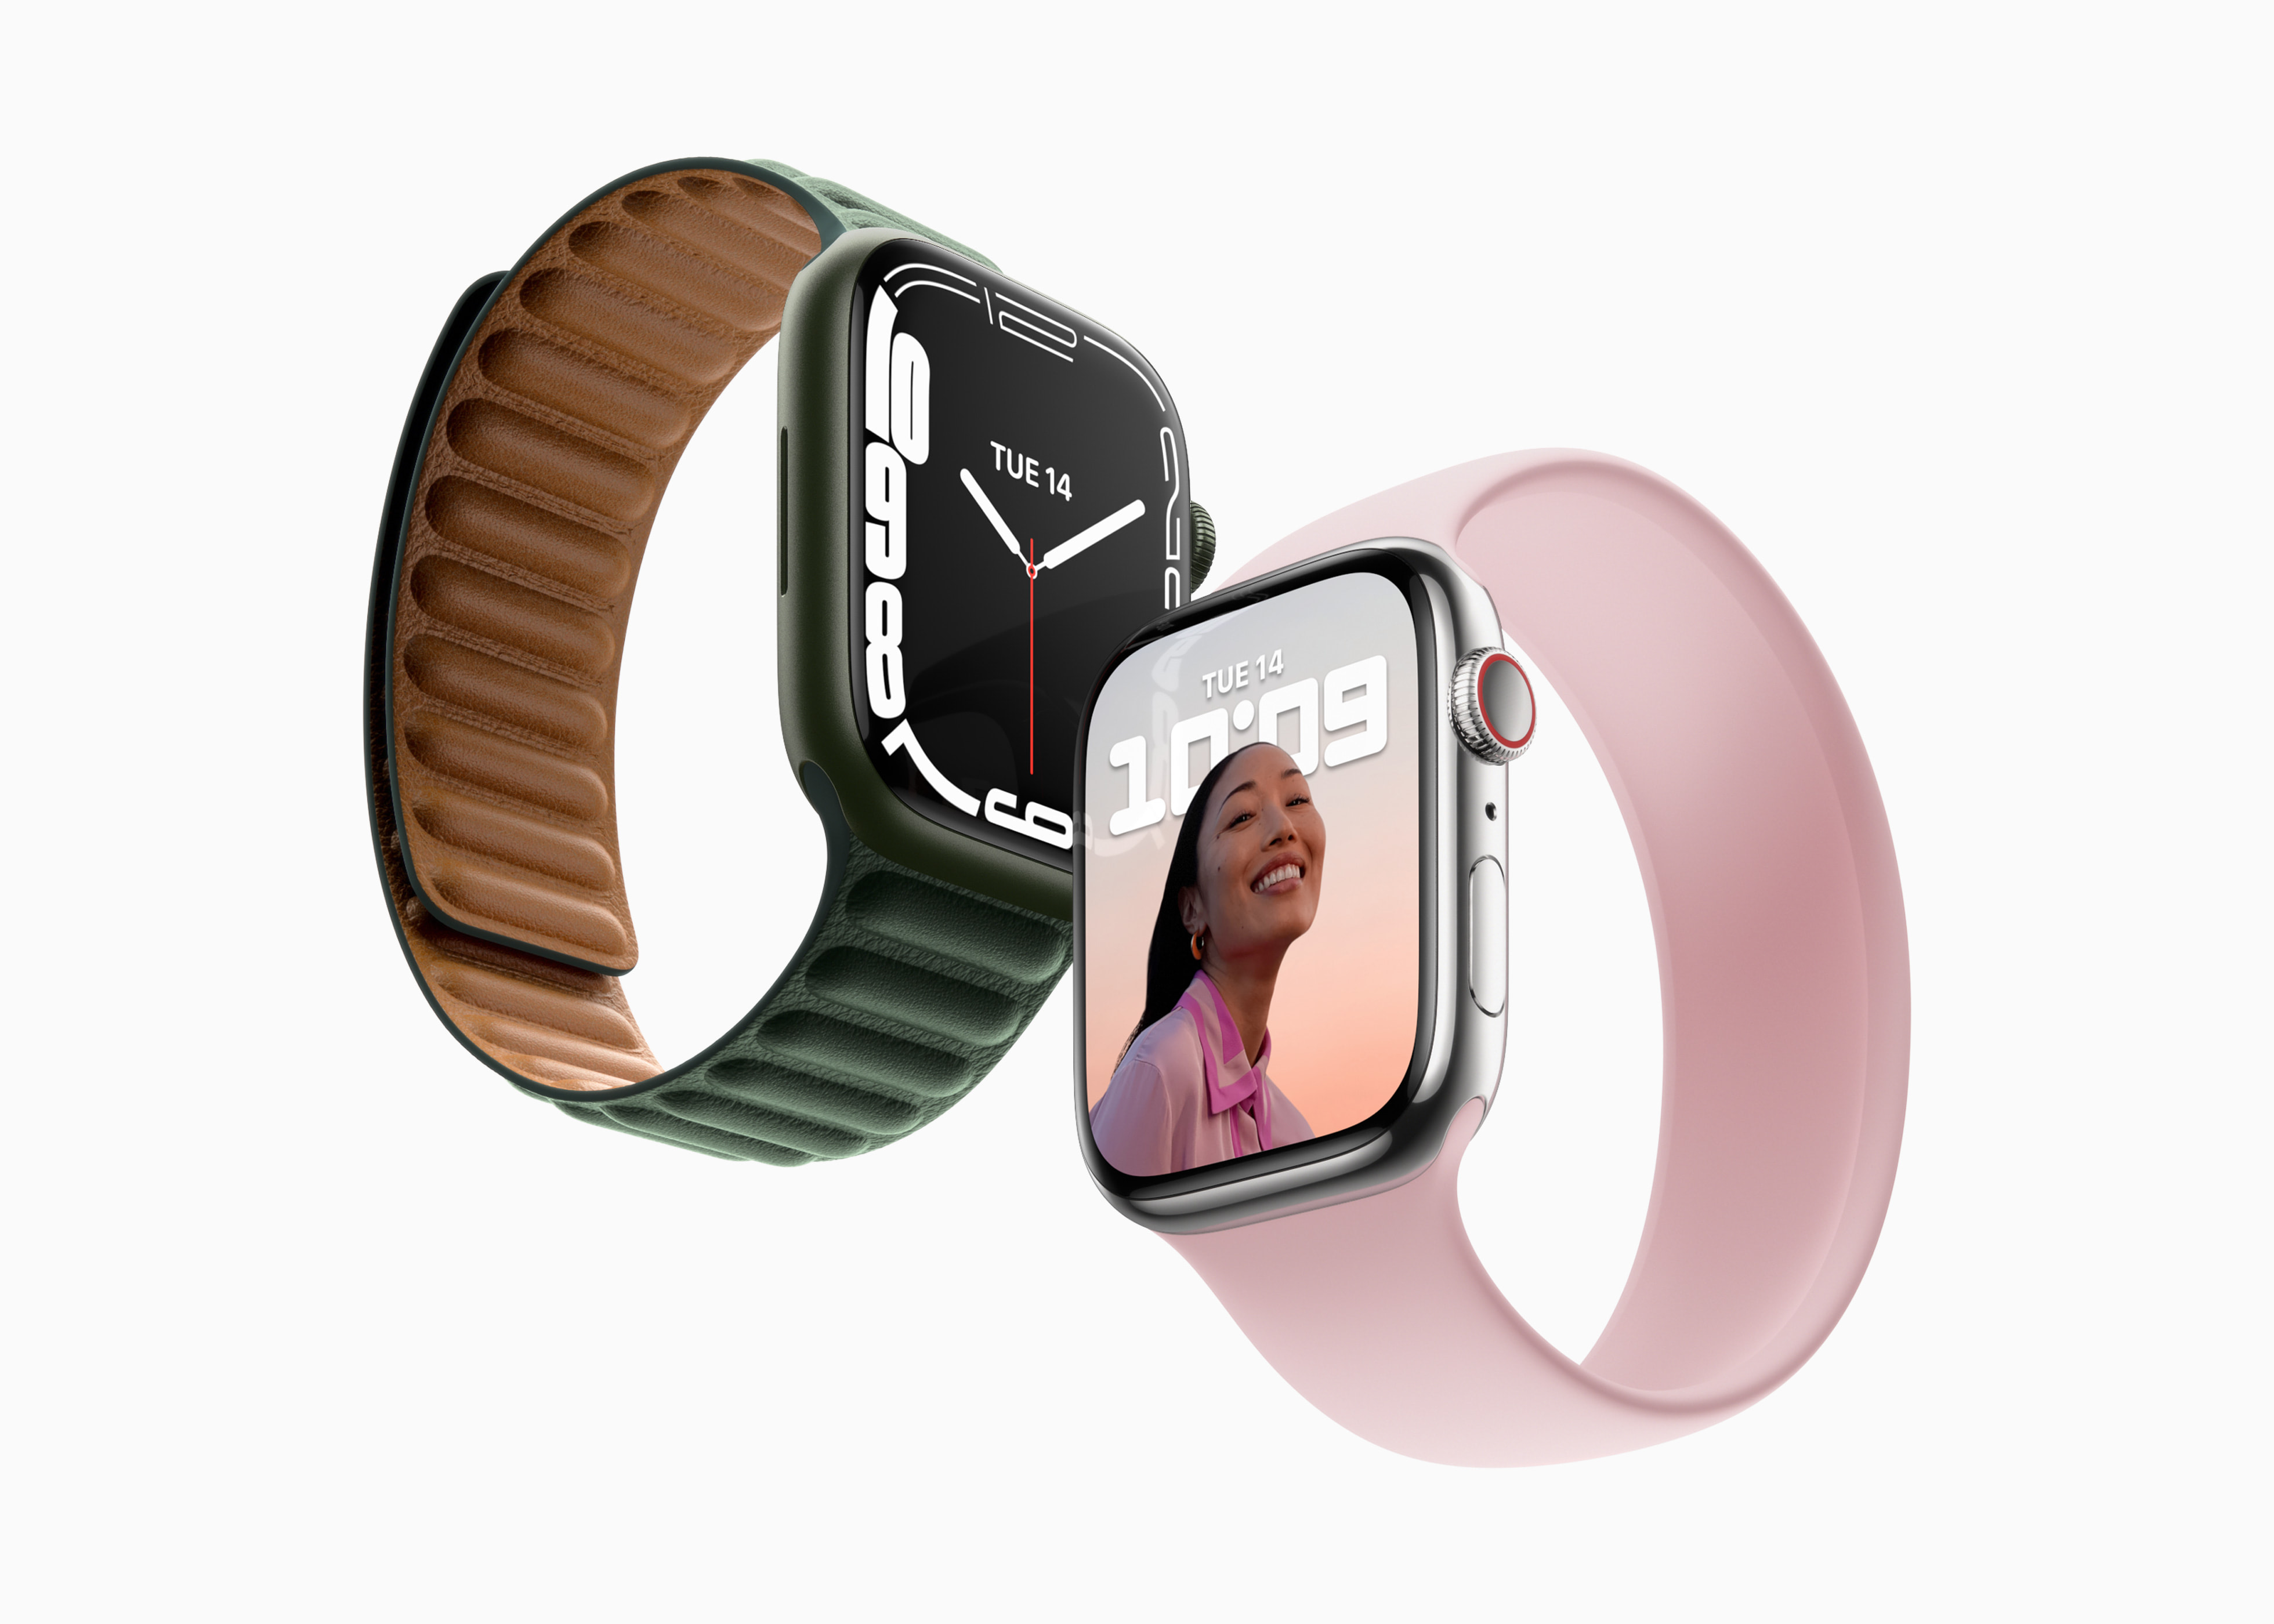 Do You Need a Data Plan for Your Apple Watch? 12